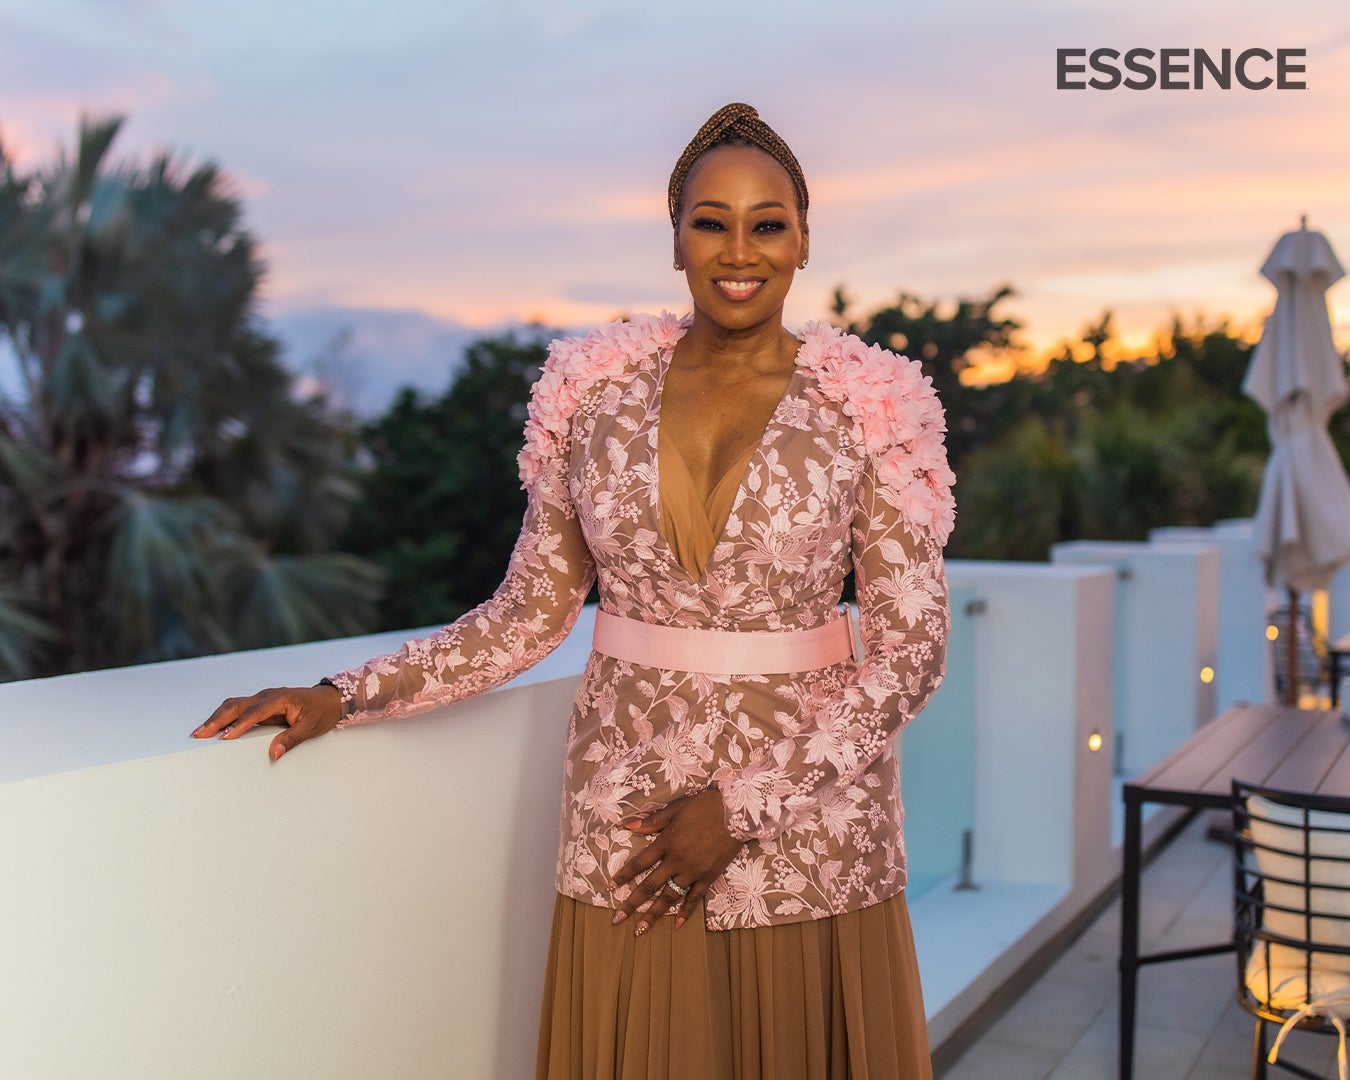 We Were Guests At Shaunie O'Neal And Keion Henderson's Wedding In Anguilla And Have The Photos To Prove It